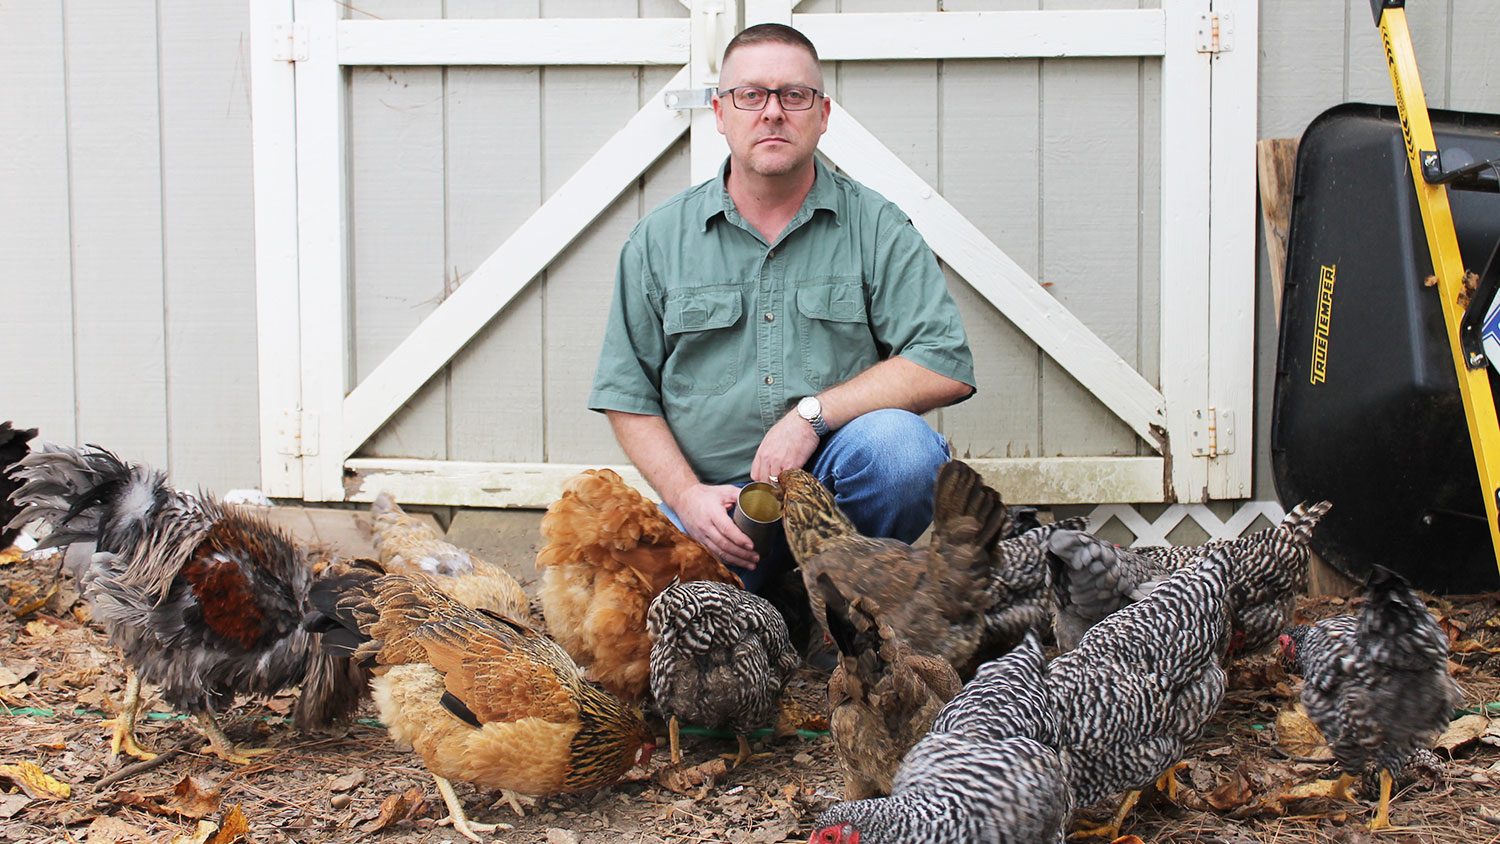 Farmer in front of a barn with several chickens